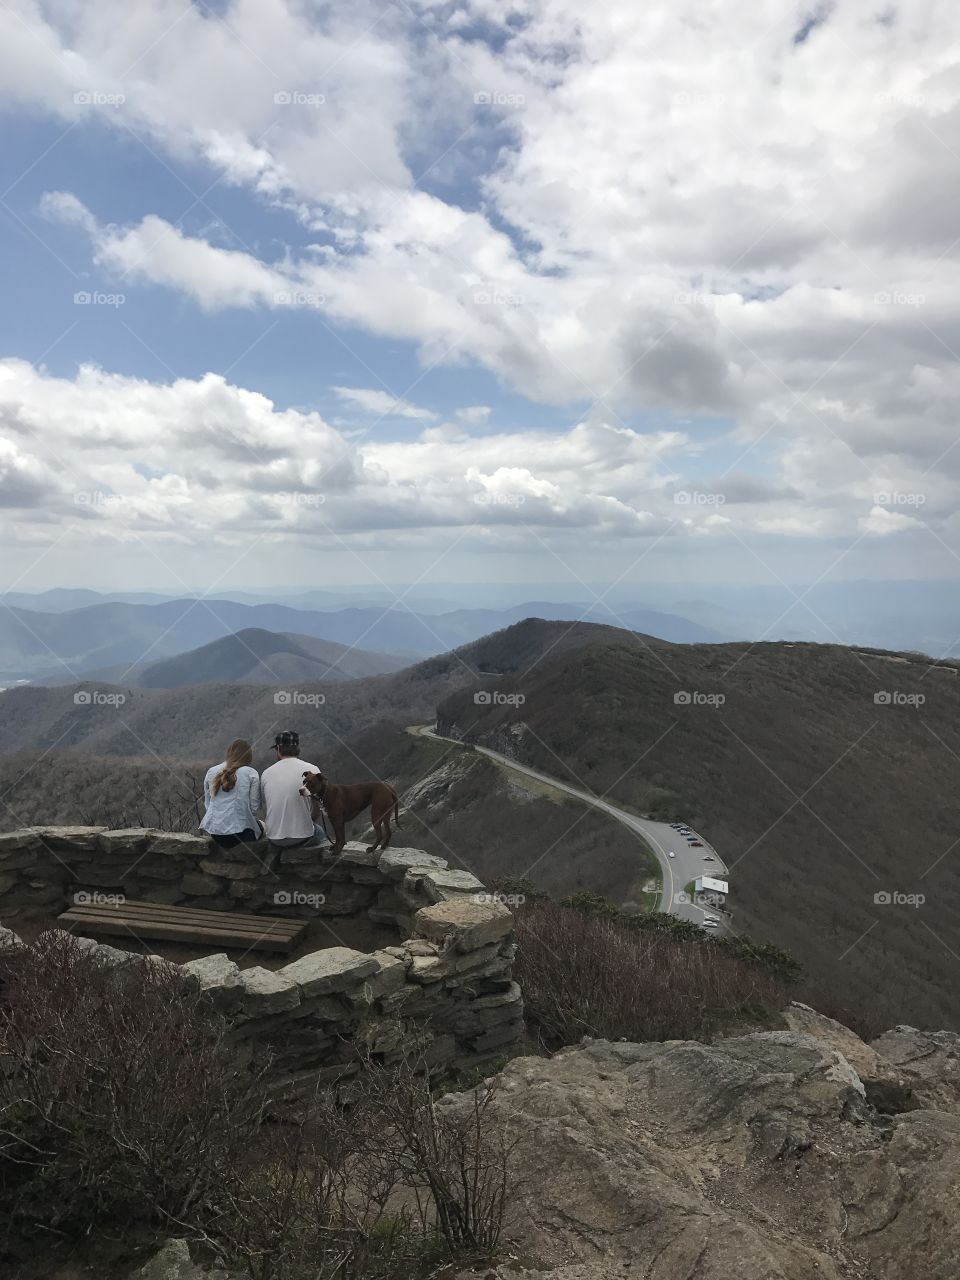 An easy 1.4-mile round trip hike to the 6000-foot summit of Craggy Pinnacle offers tremendous 360-degree panoramic view of the Blue Ridge Mountain and its parkway. #BlueRidge #Pinnacle #Parkway